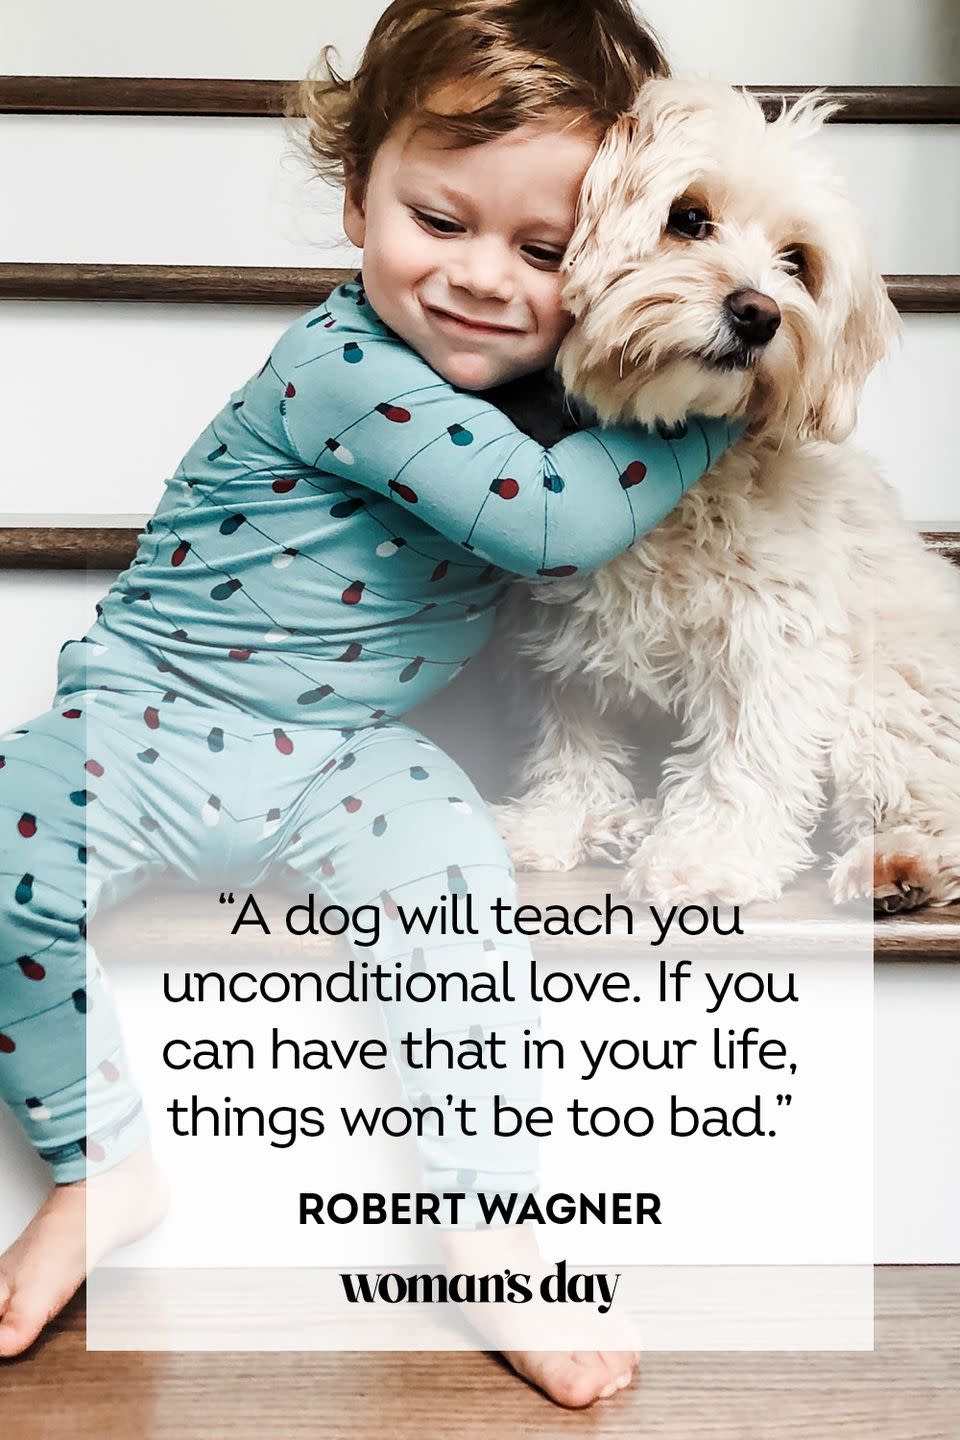 <p>“A dog will teach you unconditional love. If you can have that in your life, things won't be too bad.”</p>